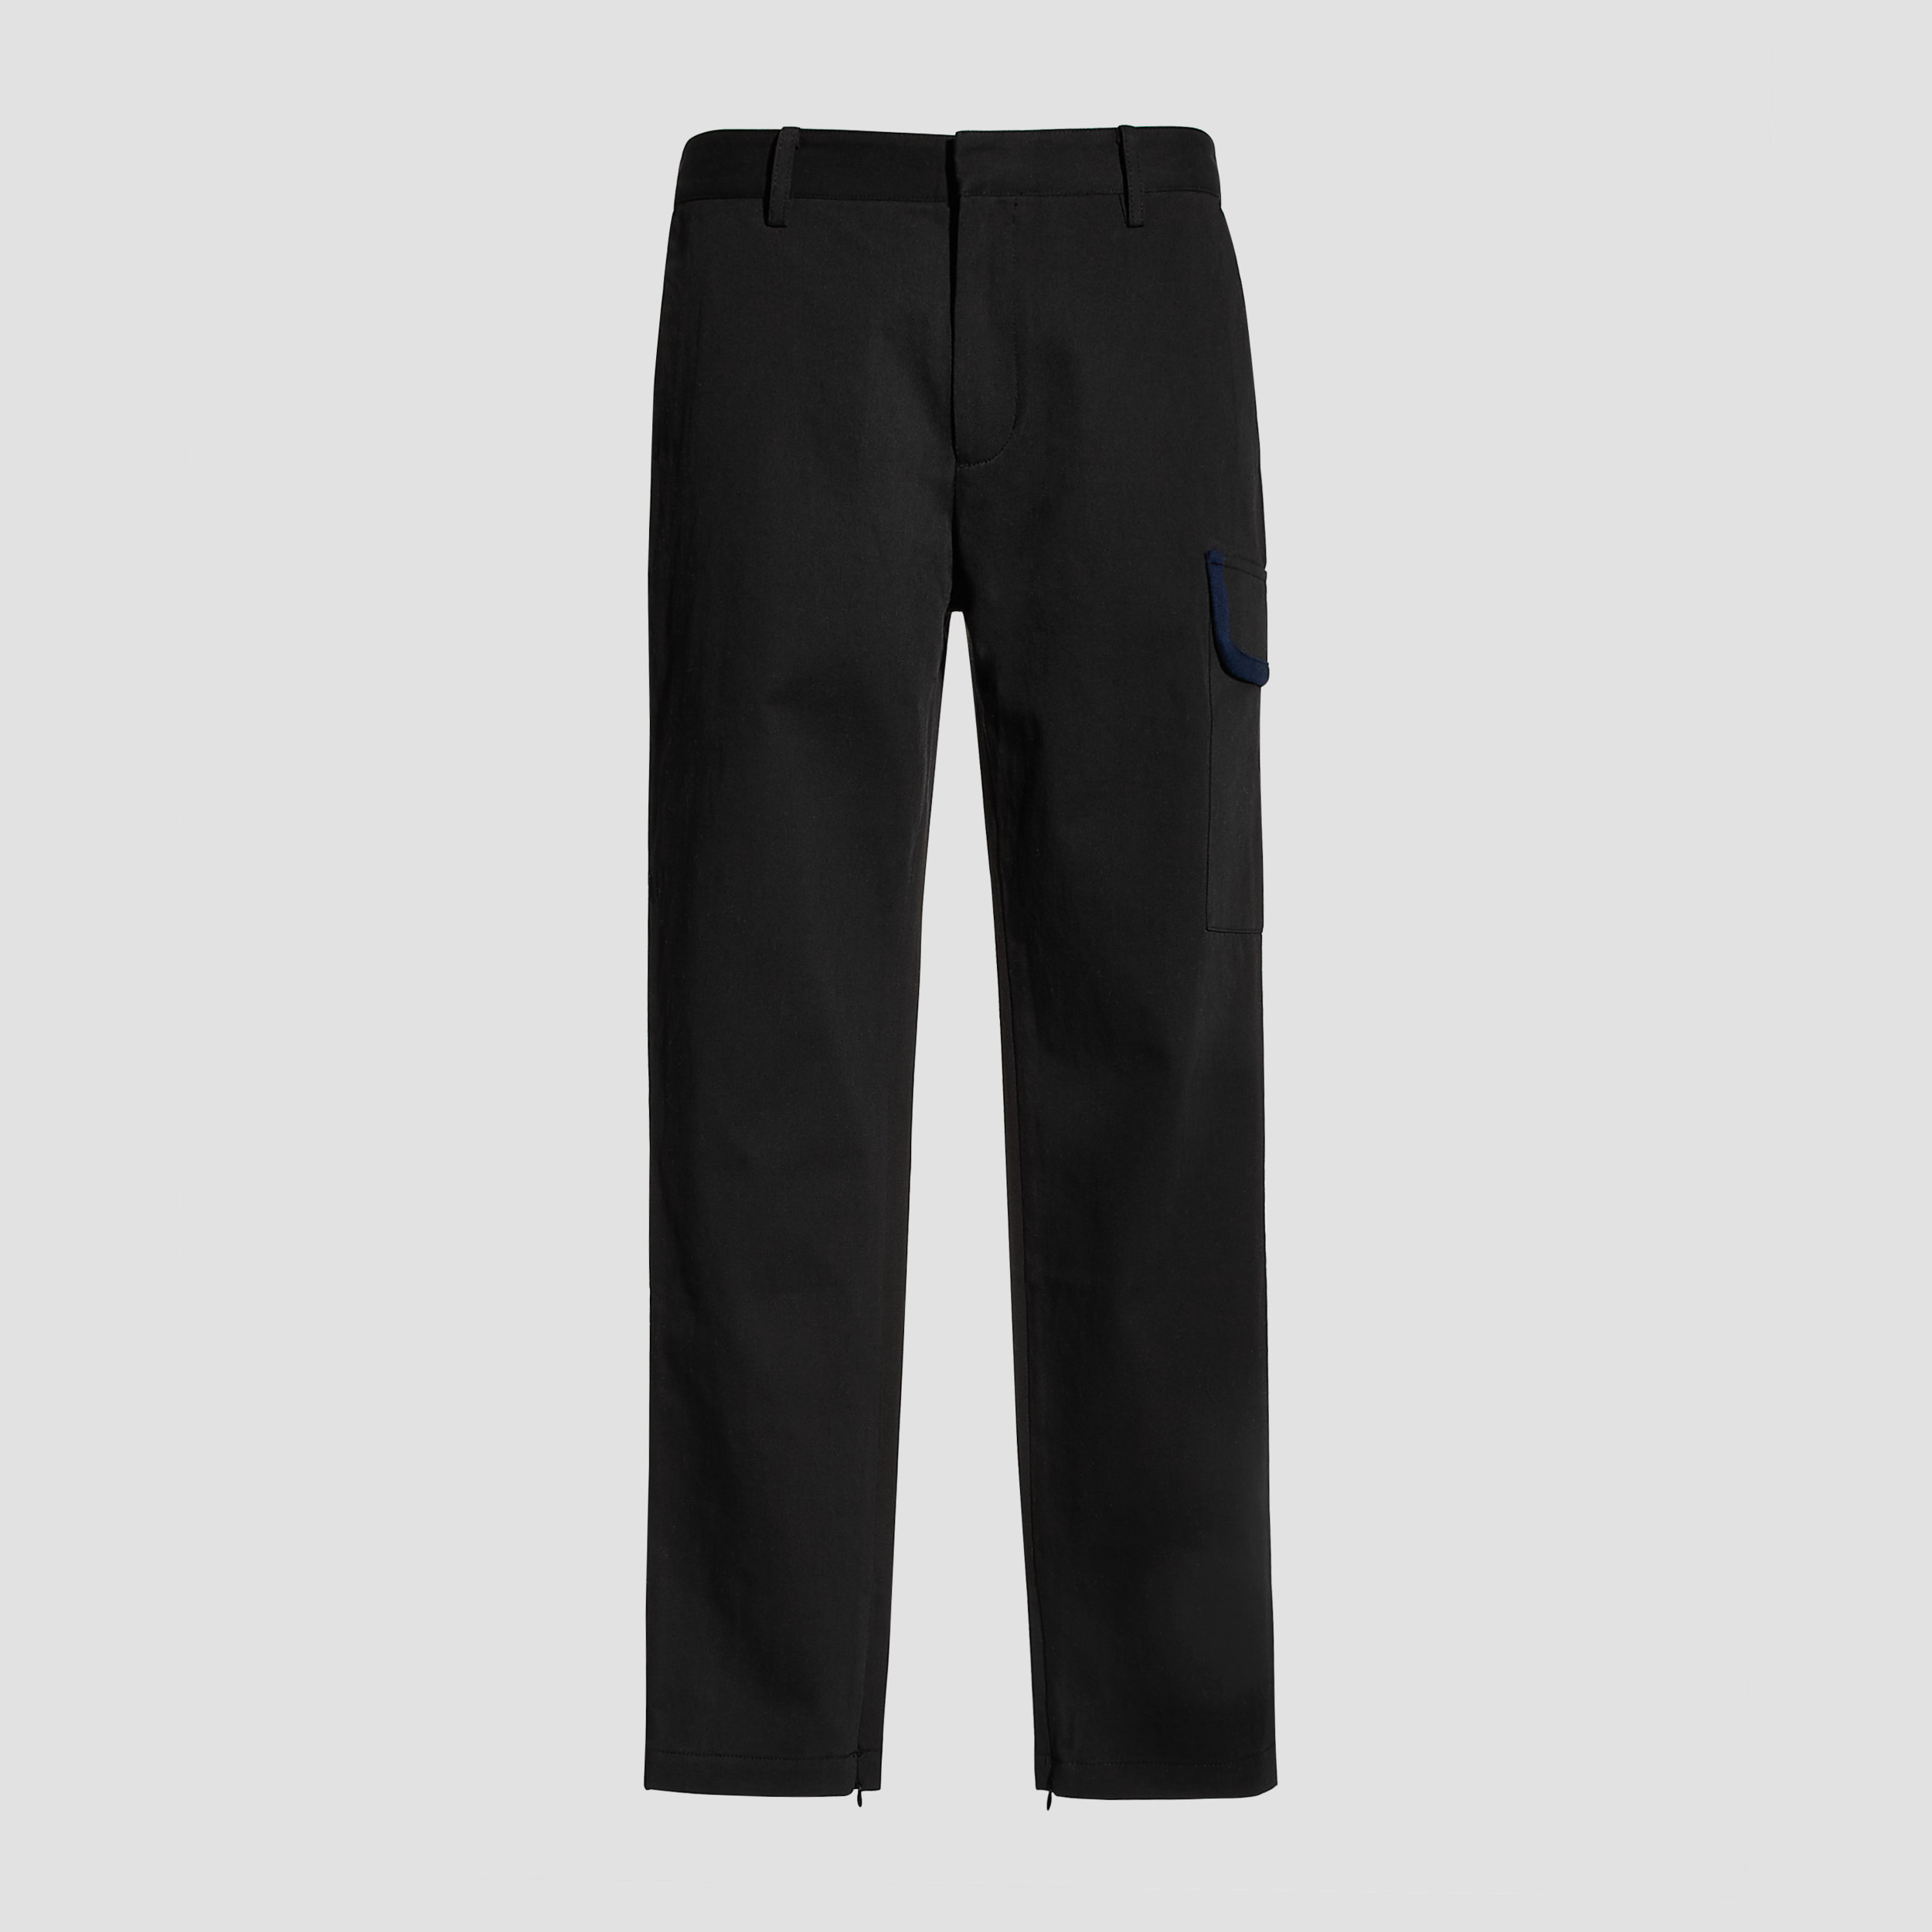 2 - Cargo Trouser copy.png